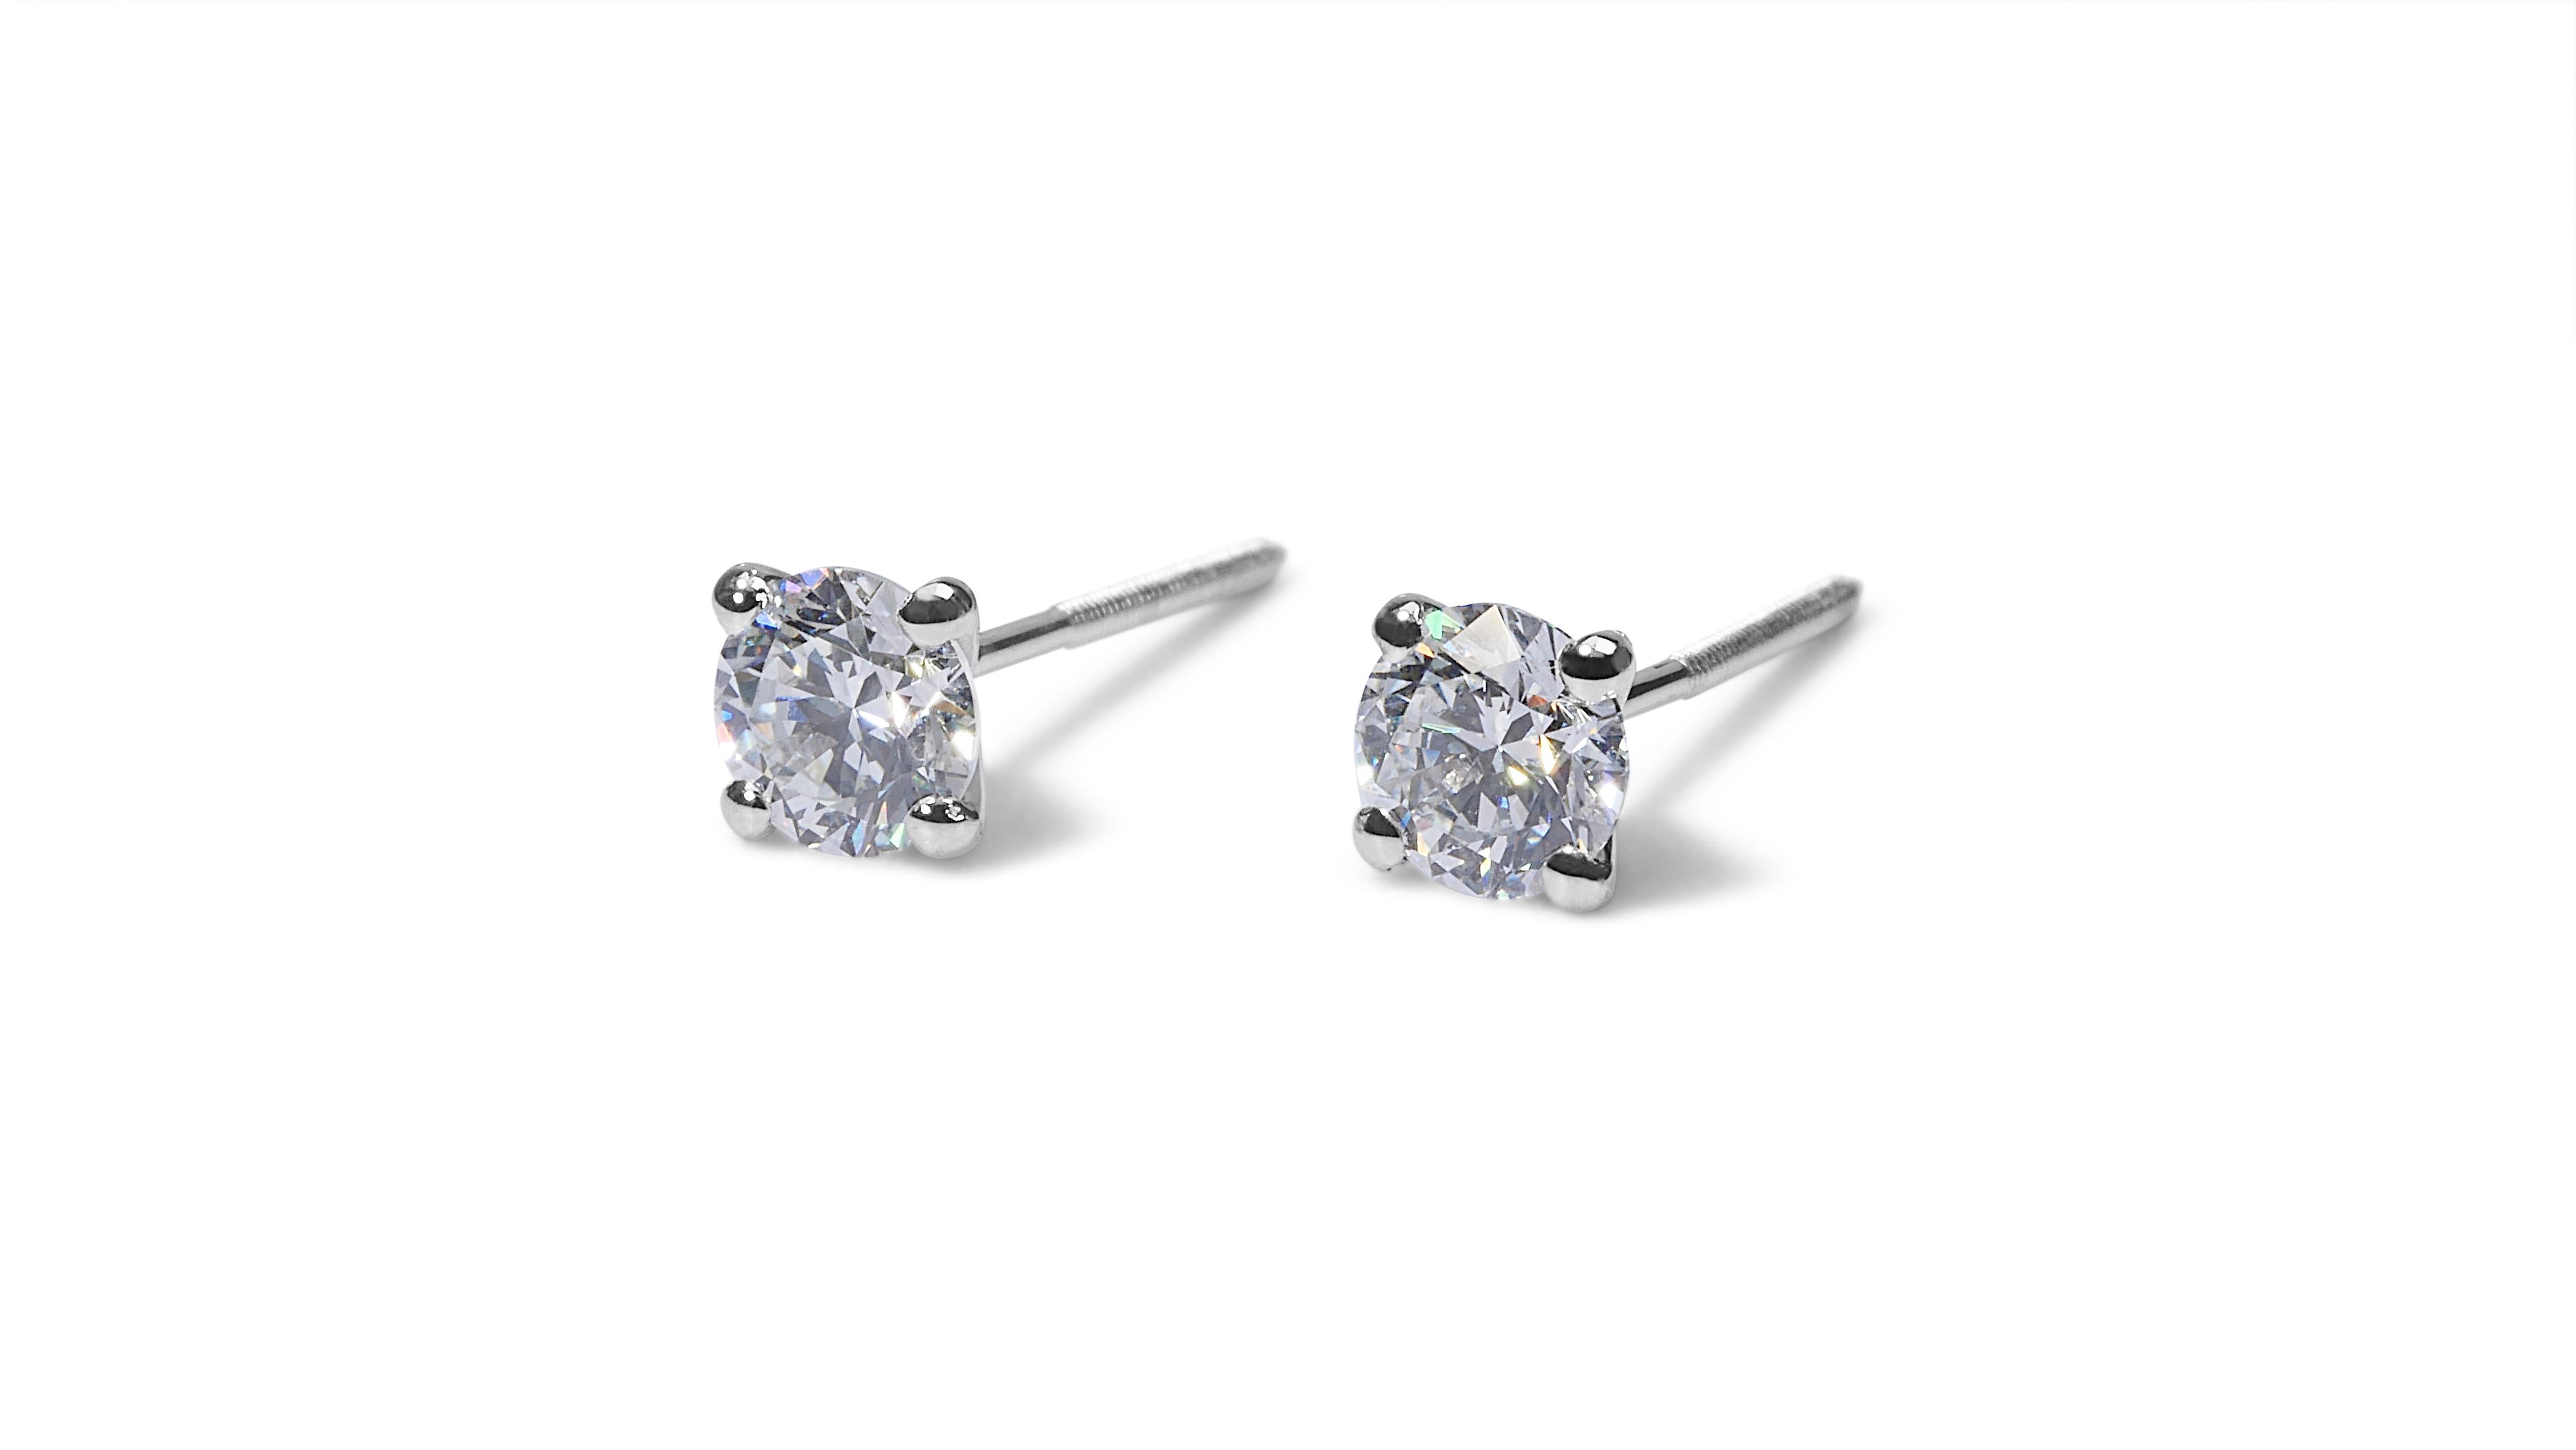 Round Cut Mesmerizing 2.01ct Diamond Stud Earrings in 18k White Gold - GIA Certified  For Sale